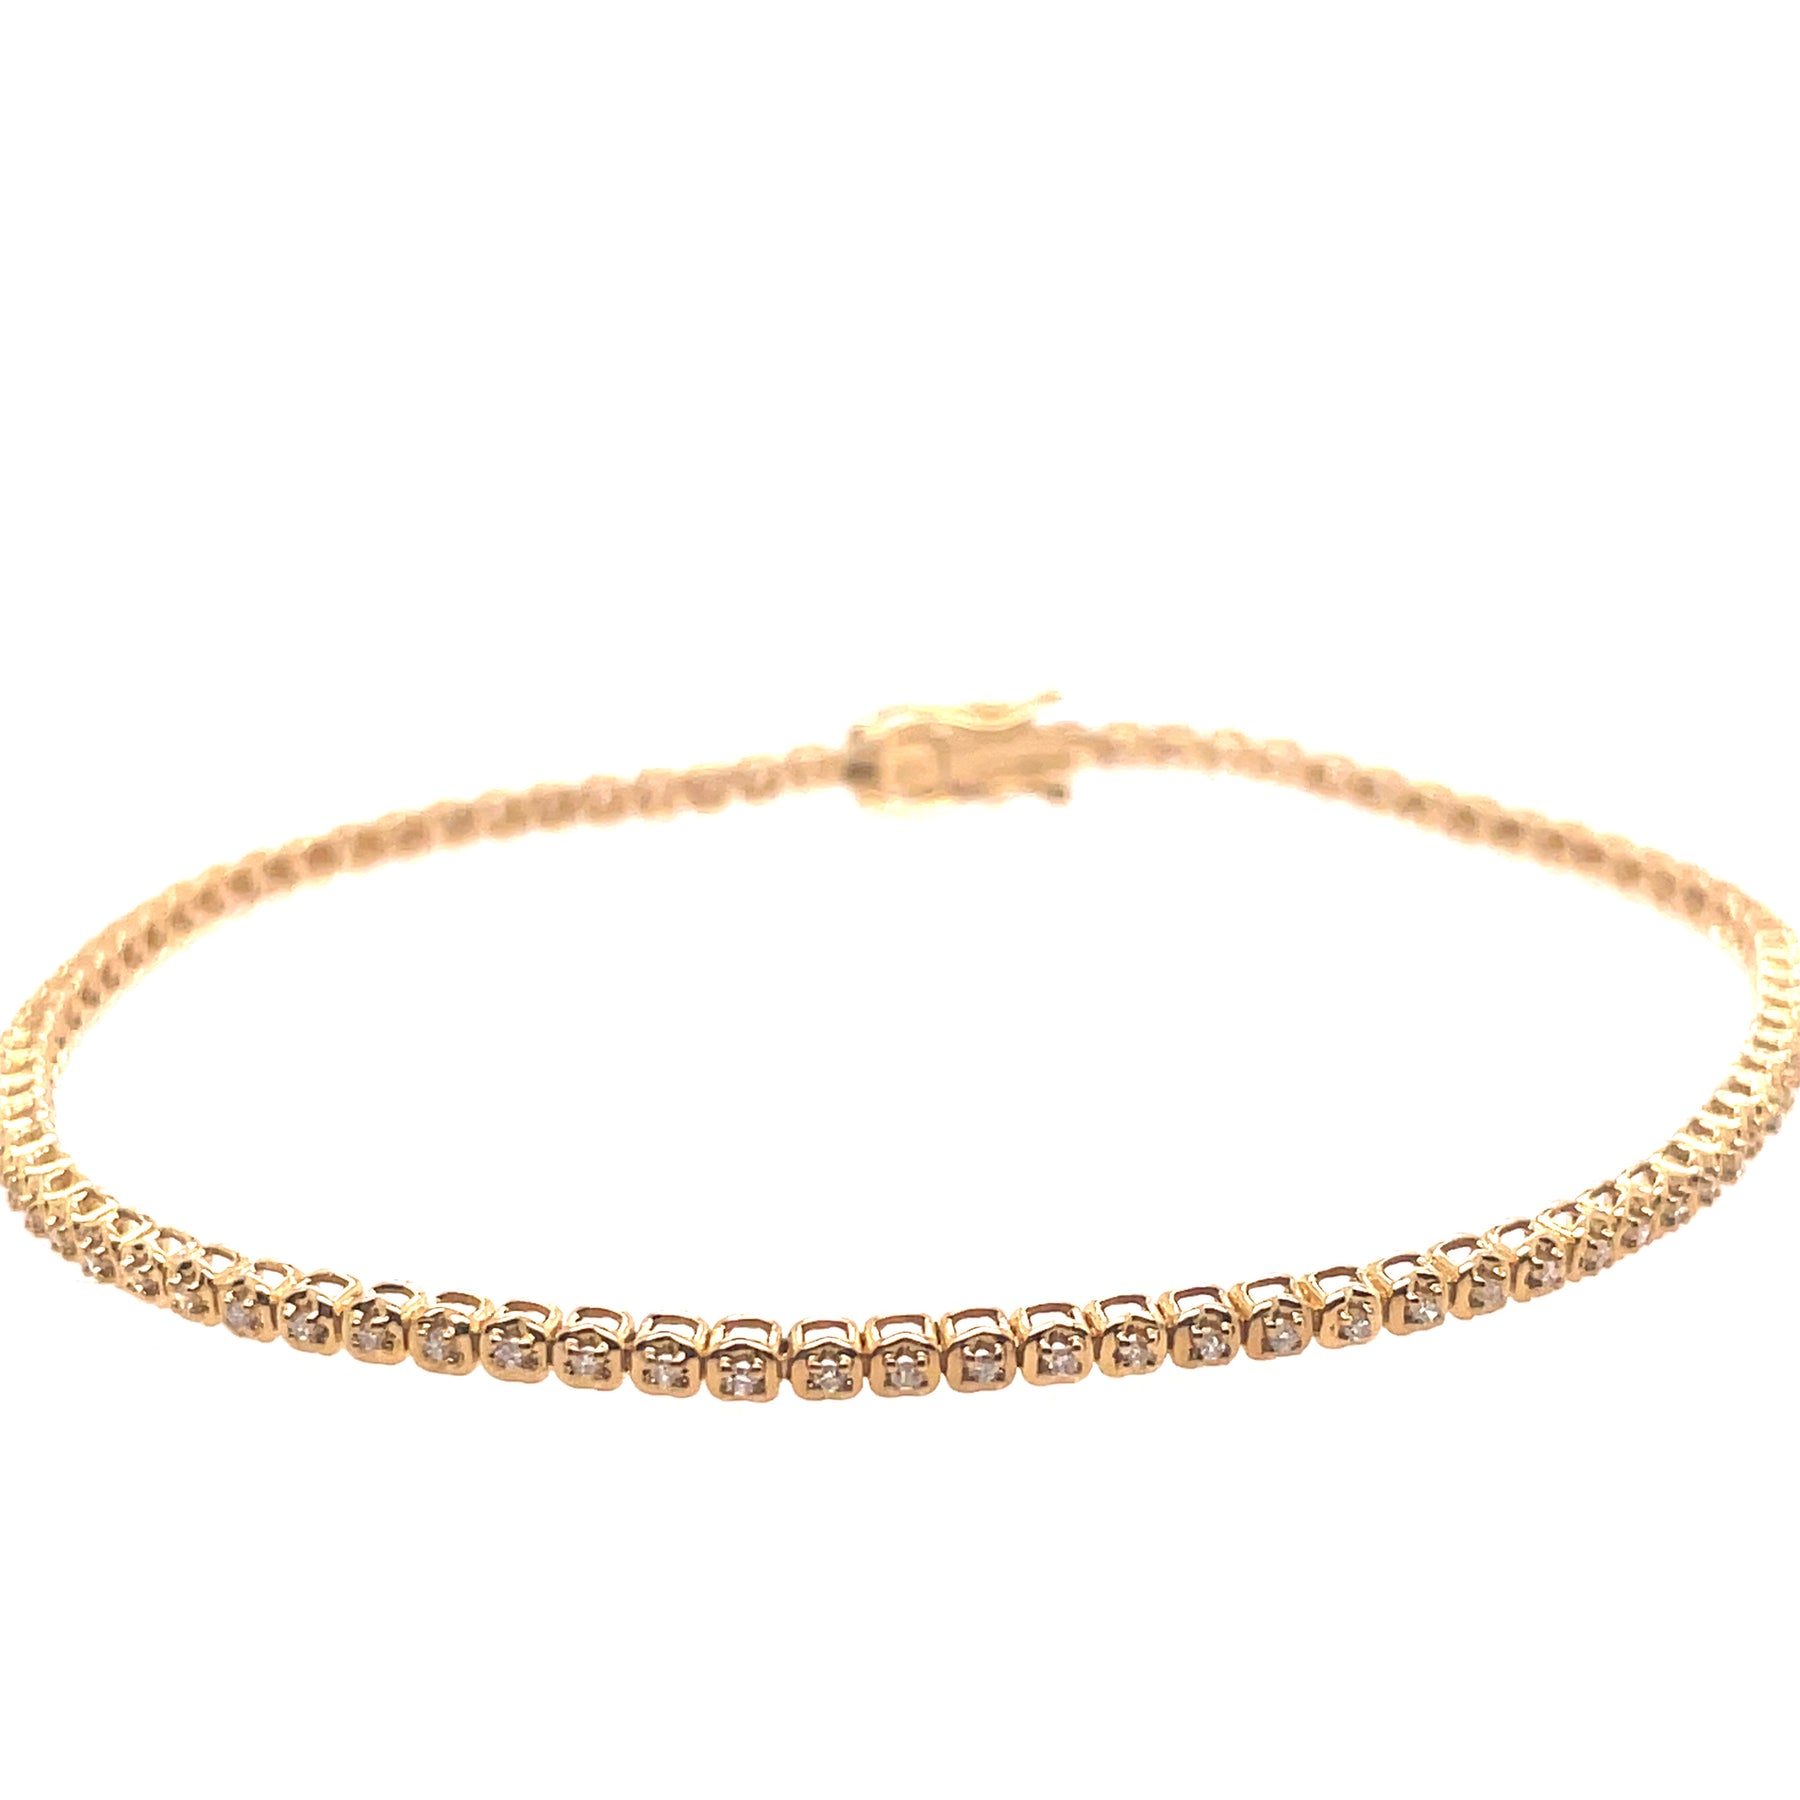 10K Yellow Gold Small Twisted Eight Link Bracelet – King Baby